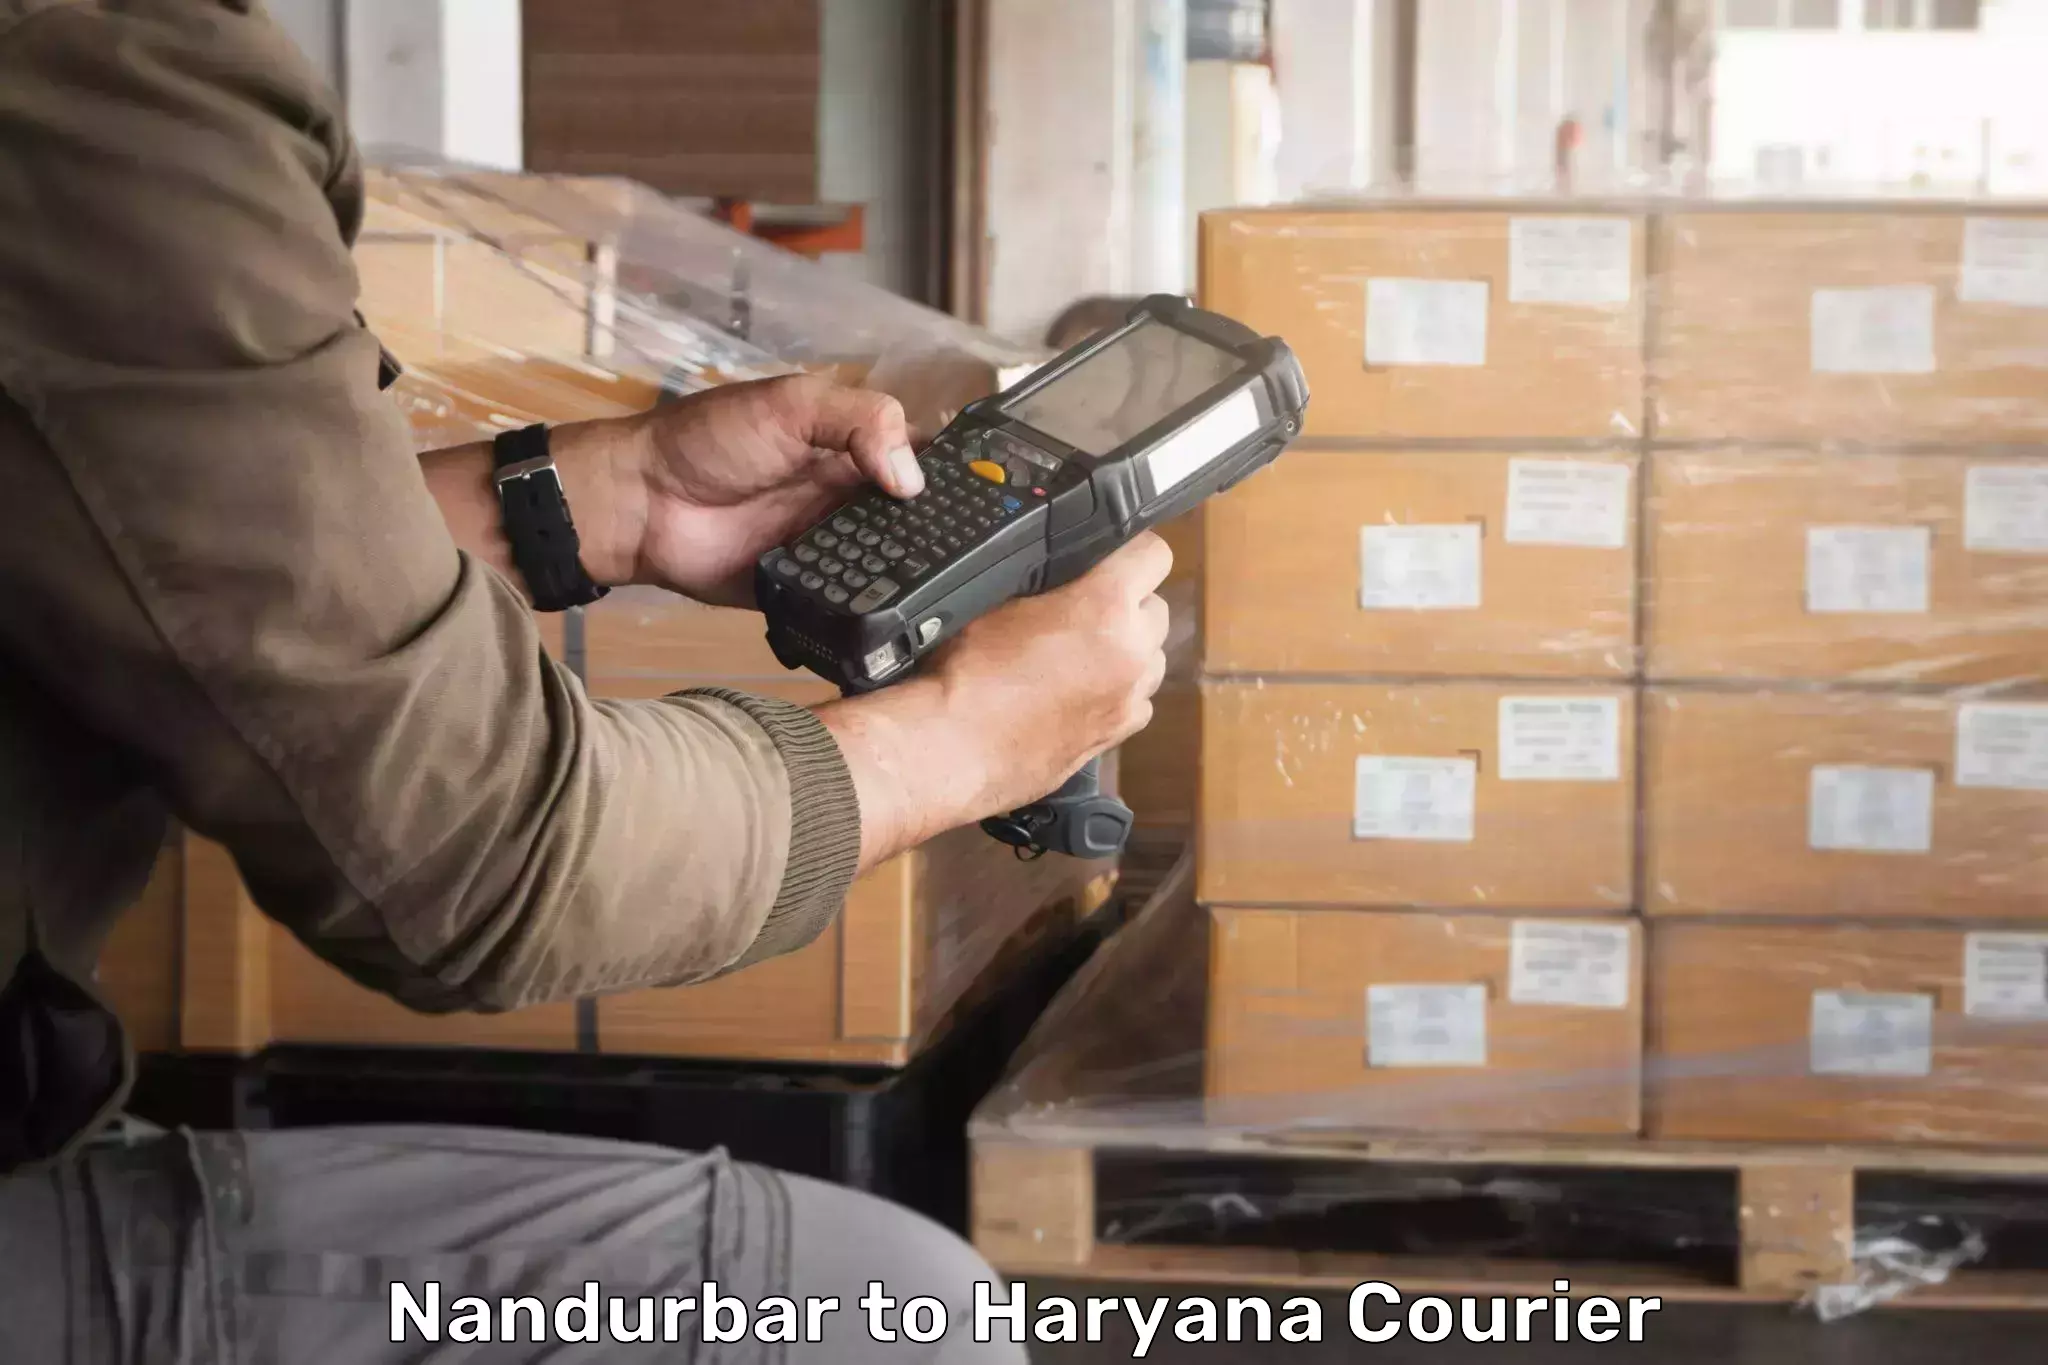 Fast delivery service Nandurbar to NCR Haryana